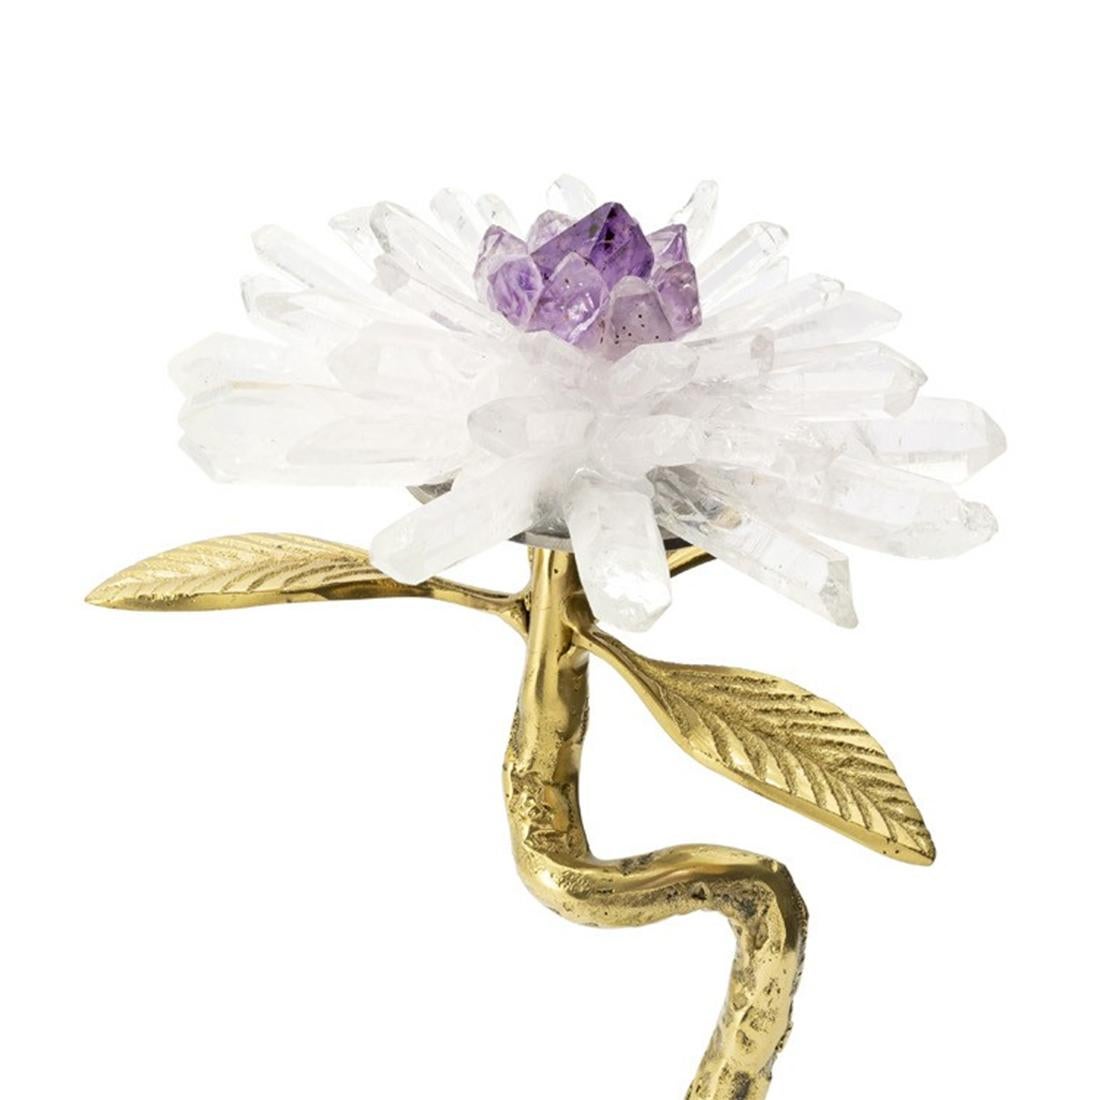 Sculpture amethyst flower I on marble base
with metal gold finish leaves, with minerals 
stones sticks and with amethyst stone in the 
heart of the flower.